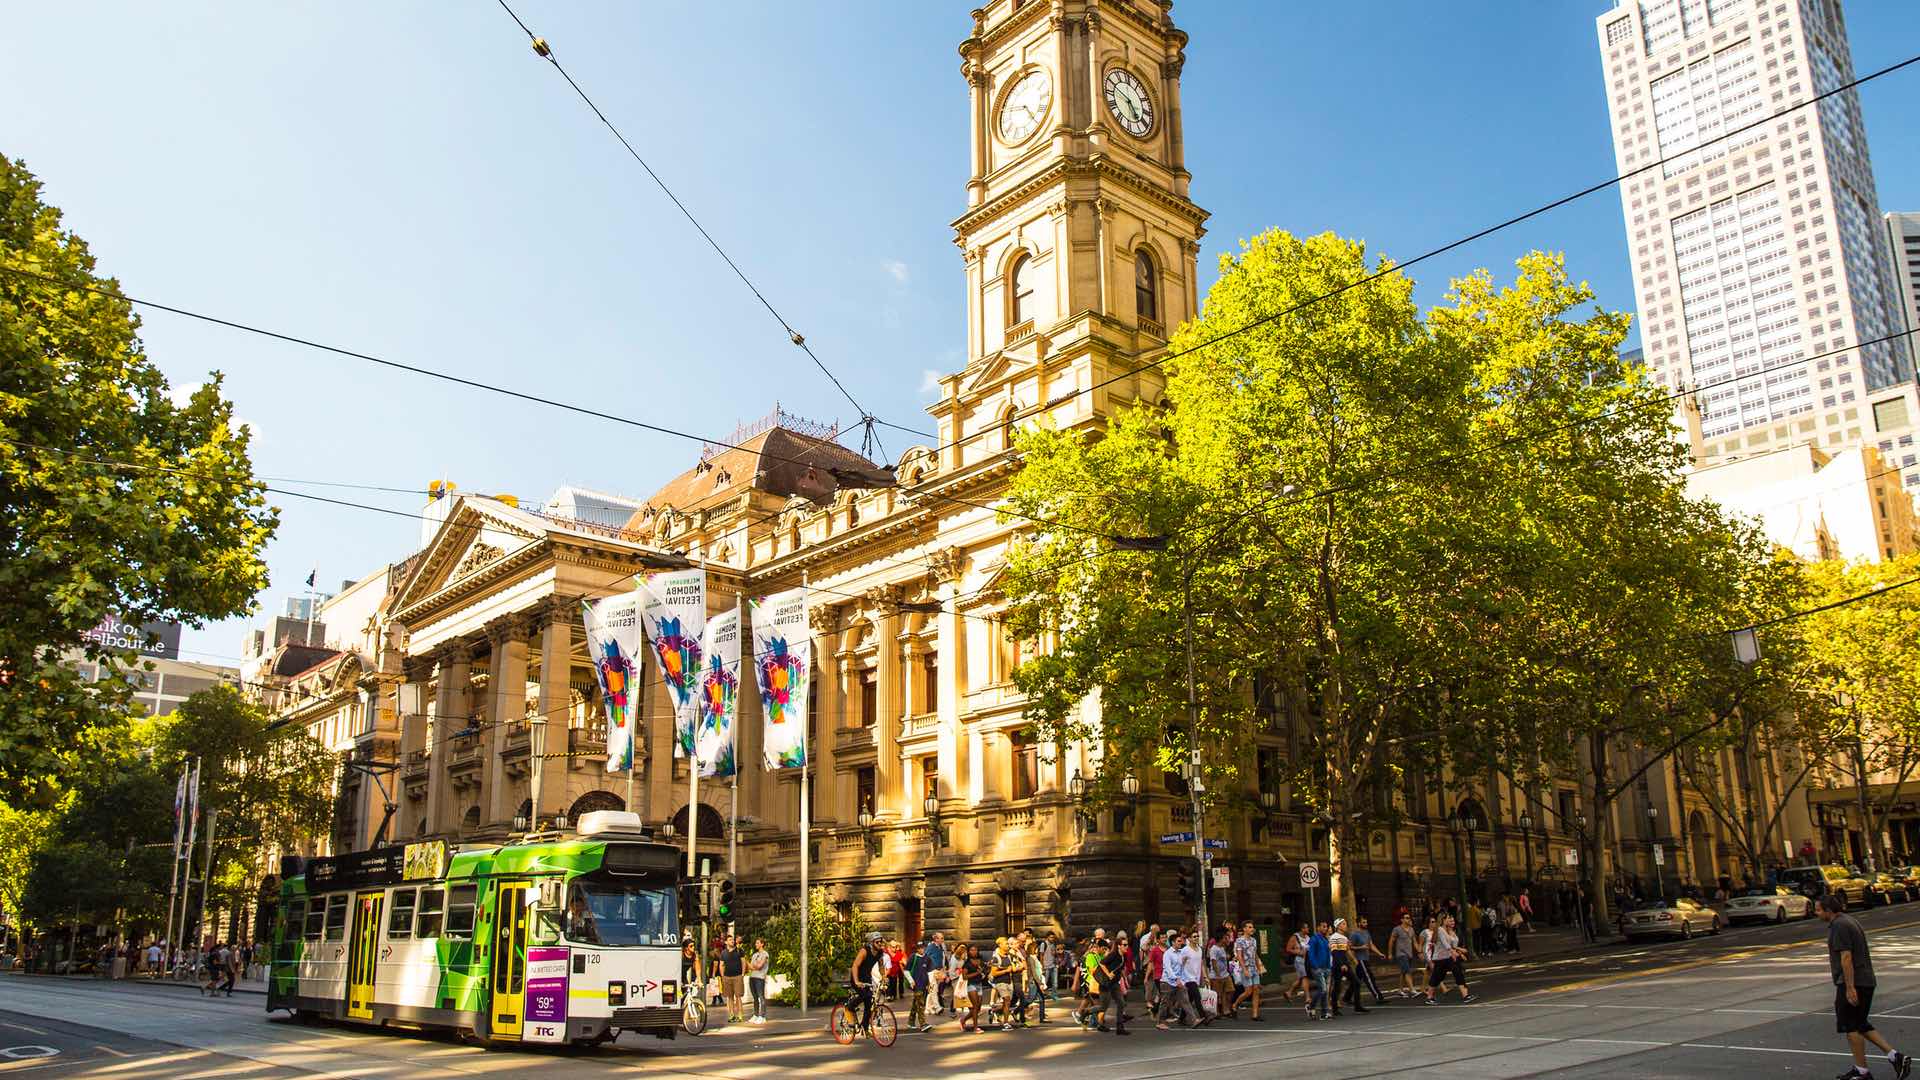 Melbourne's Tram Network Could Soon be Affected by a 48-Hour Strike